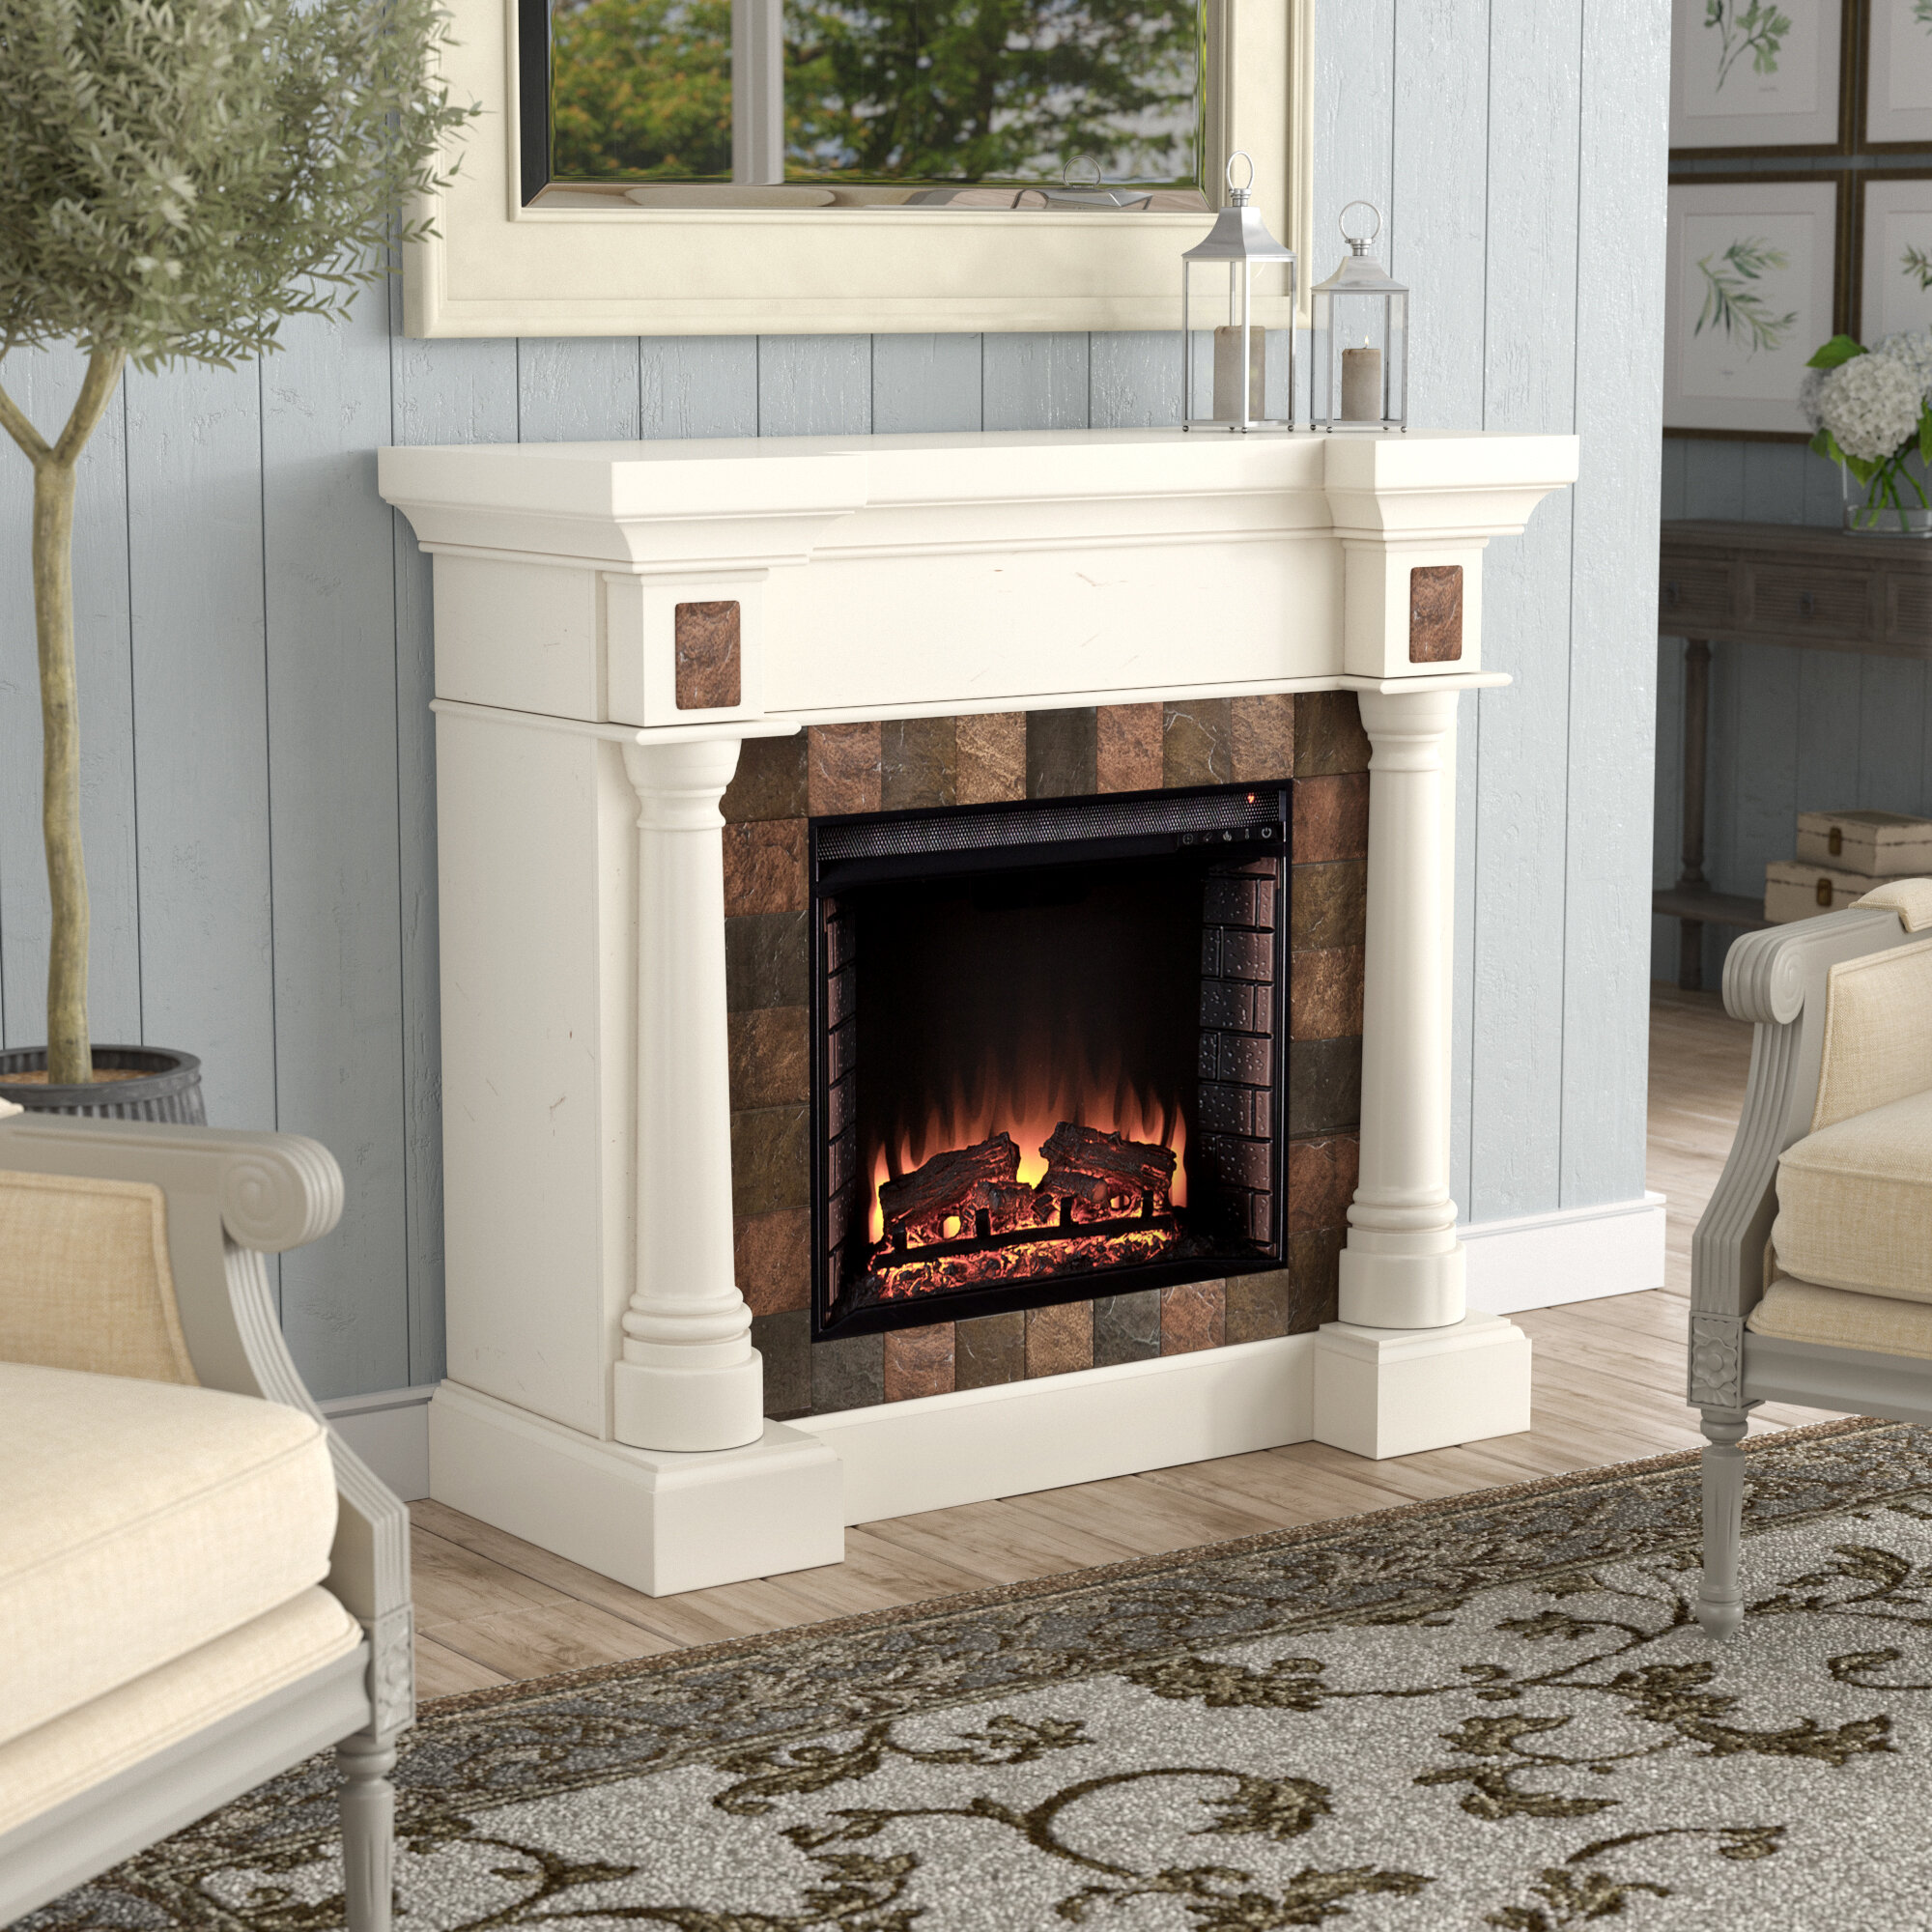 Wall Mount Electric Fireplace Insert Lovely Ridgewood Electric Fireplace